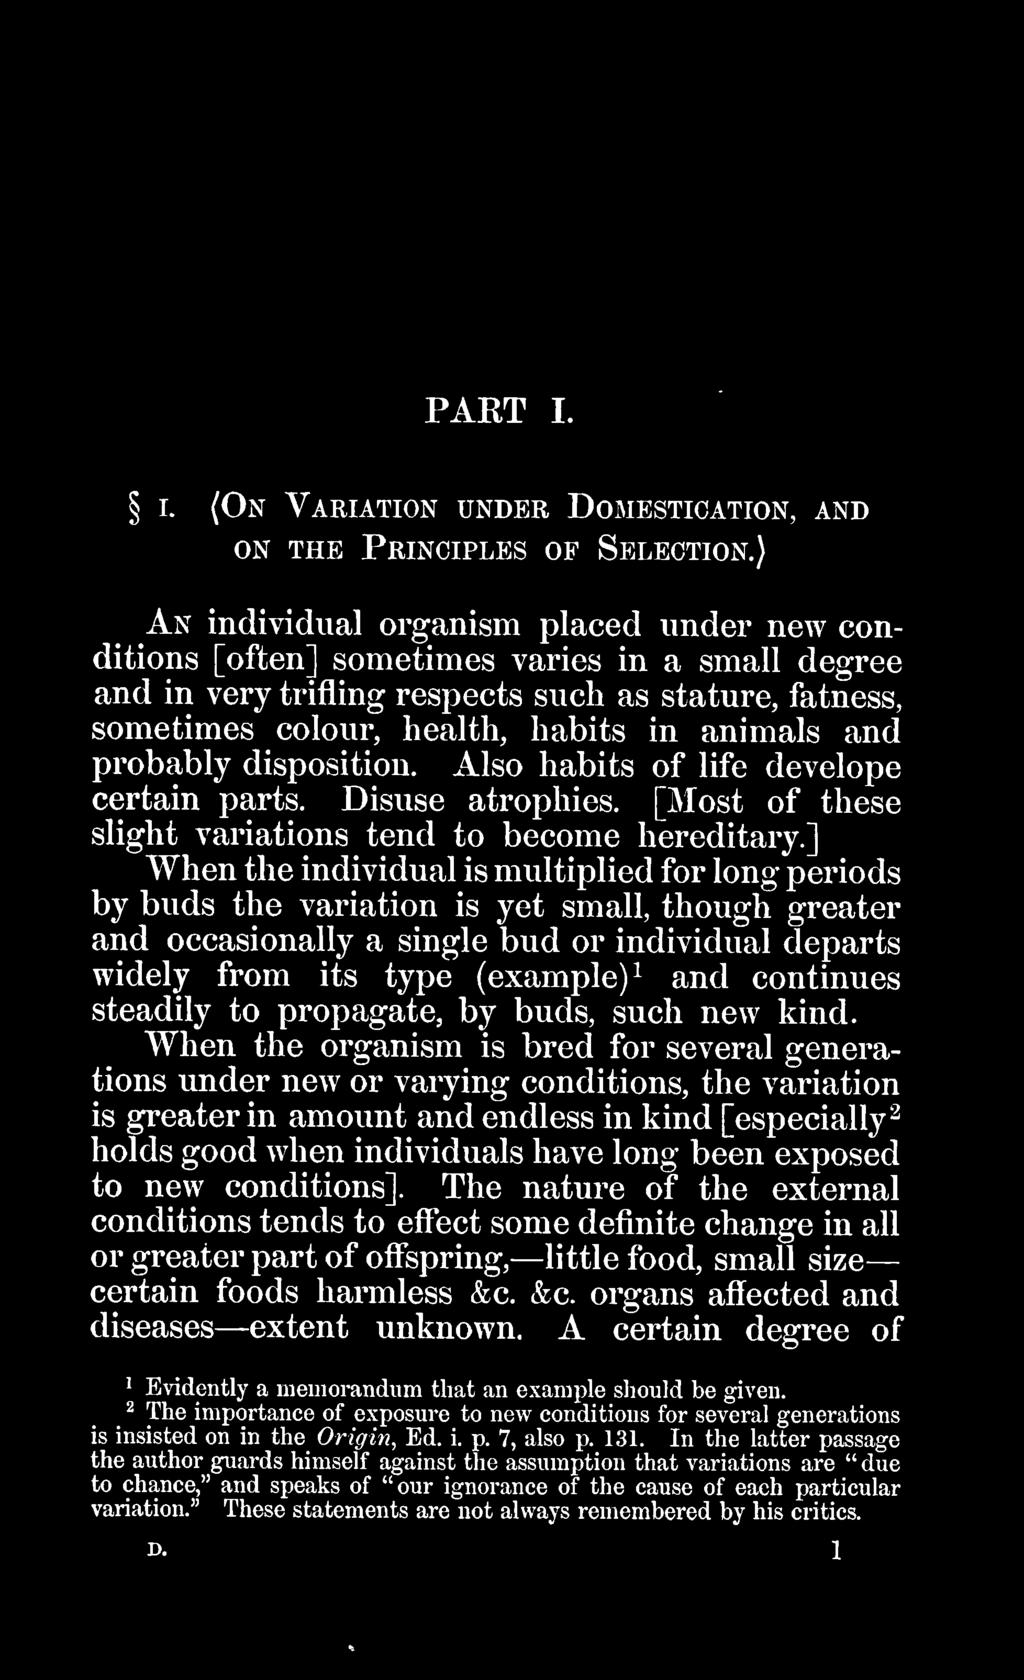 PART I. i. (ON VARIATION UNDER DOMESTICATION, AND ON THE PRINCIPLES OP SELECTION.